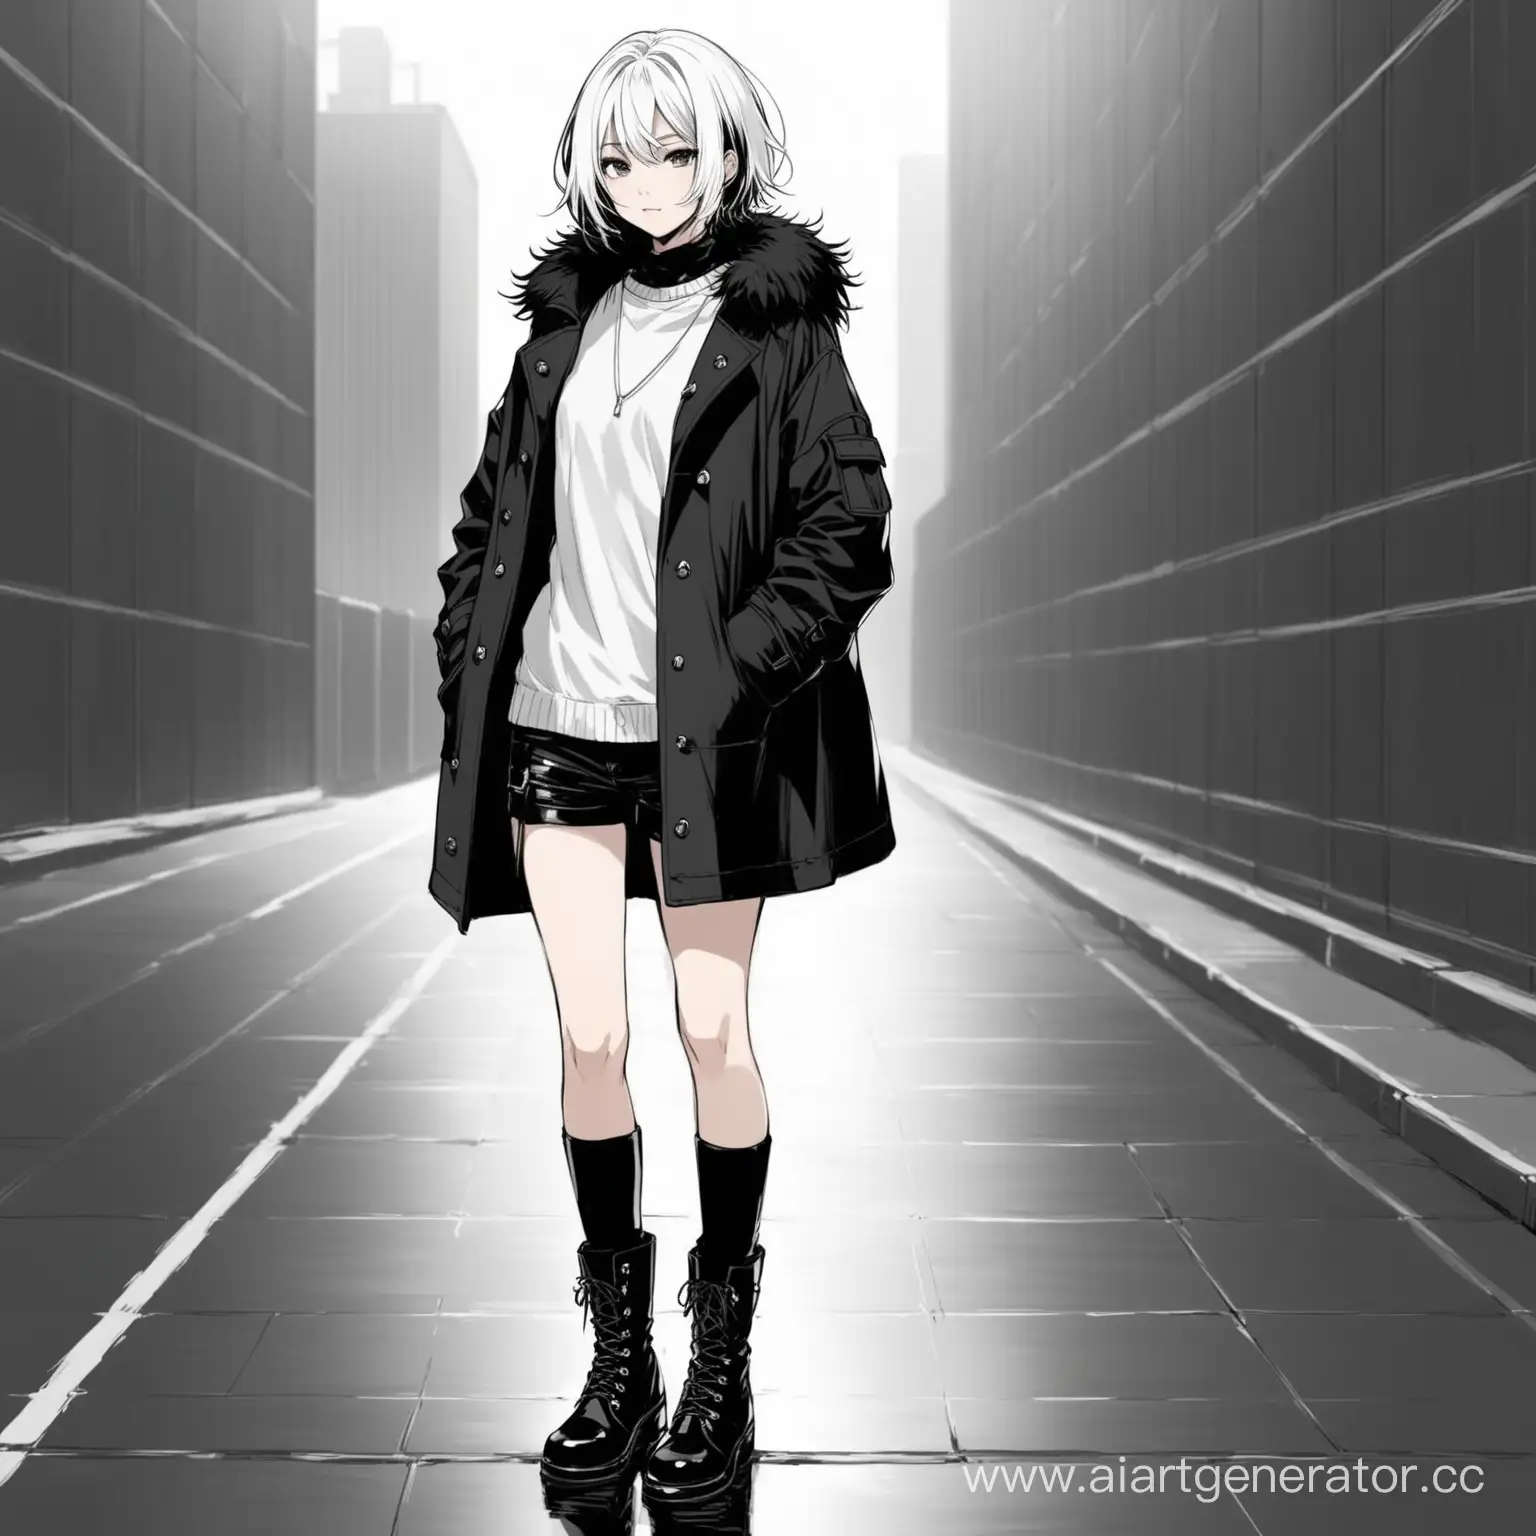 Stylish-Urban-Chic-Black-and-White-Coat-with-Shaggy-Hair-and-Boots